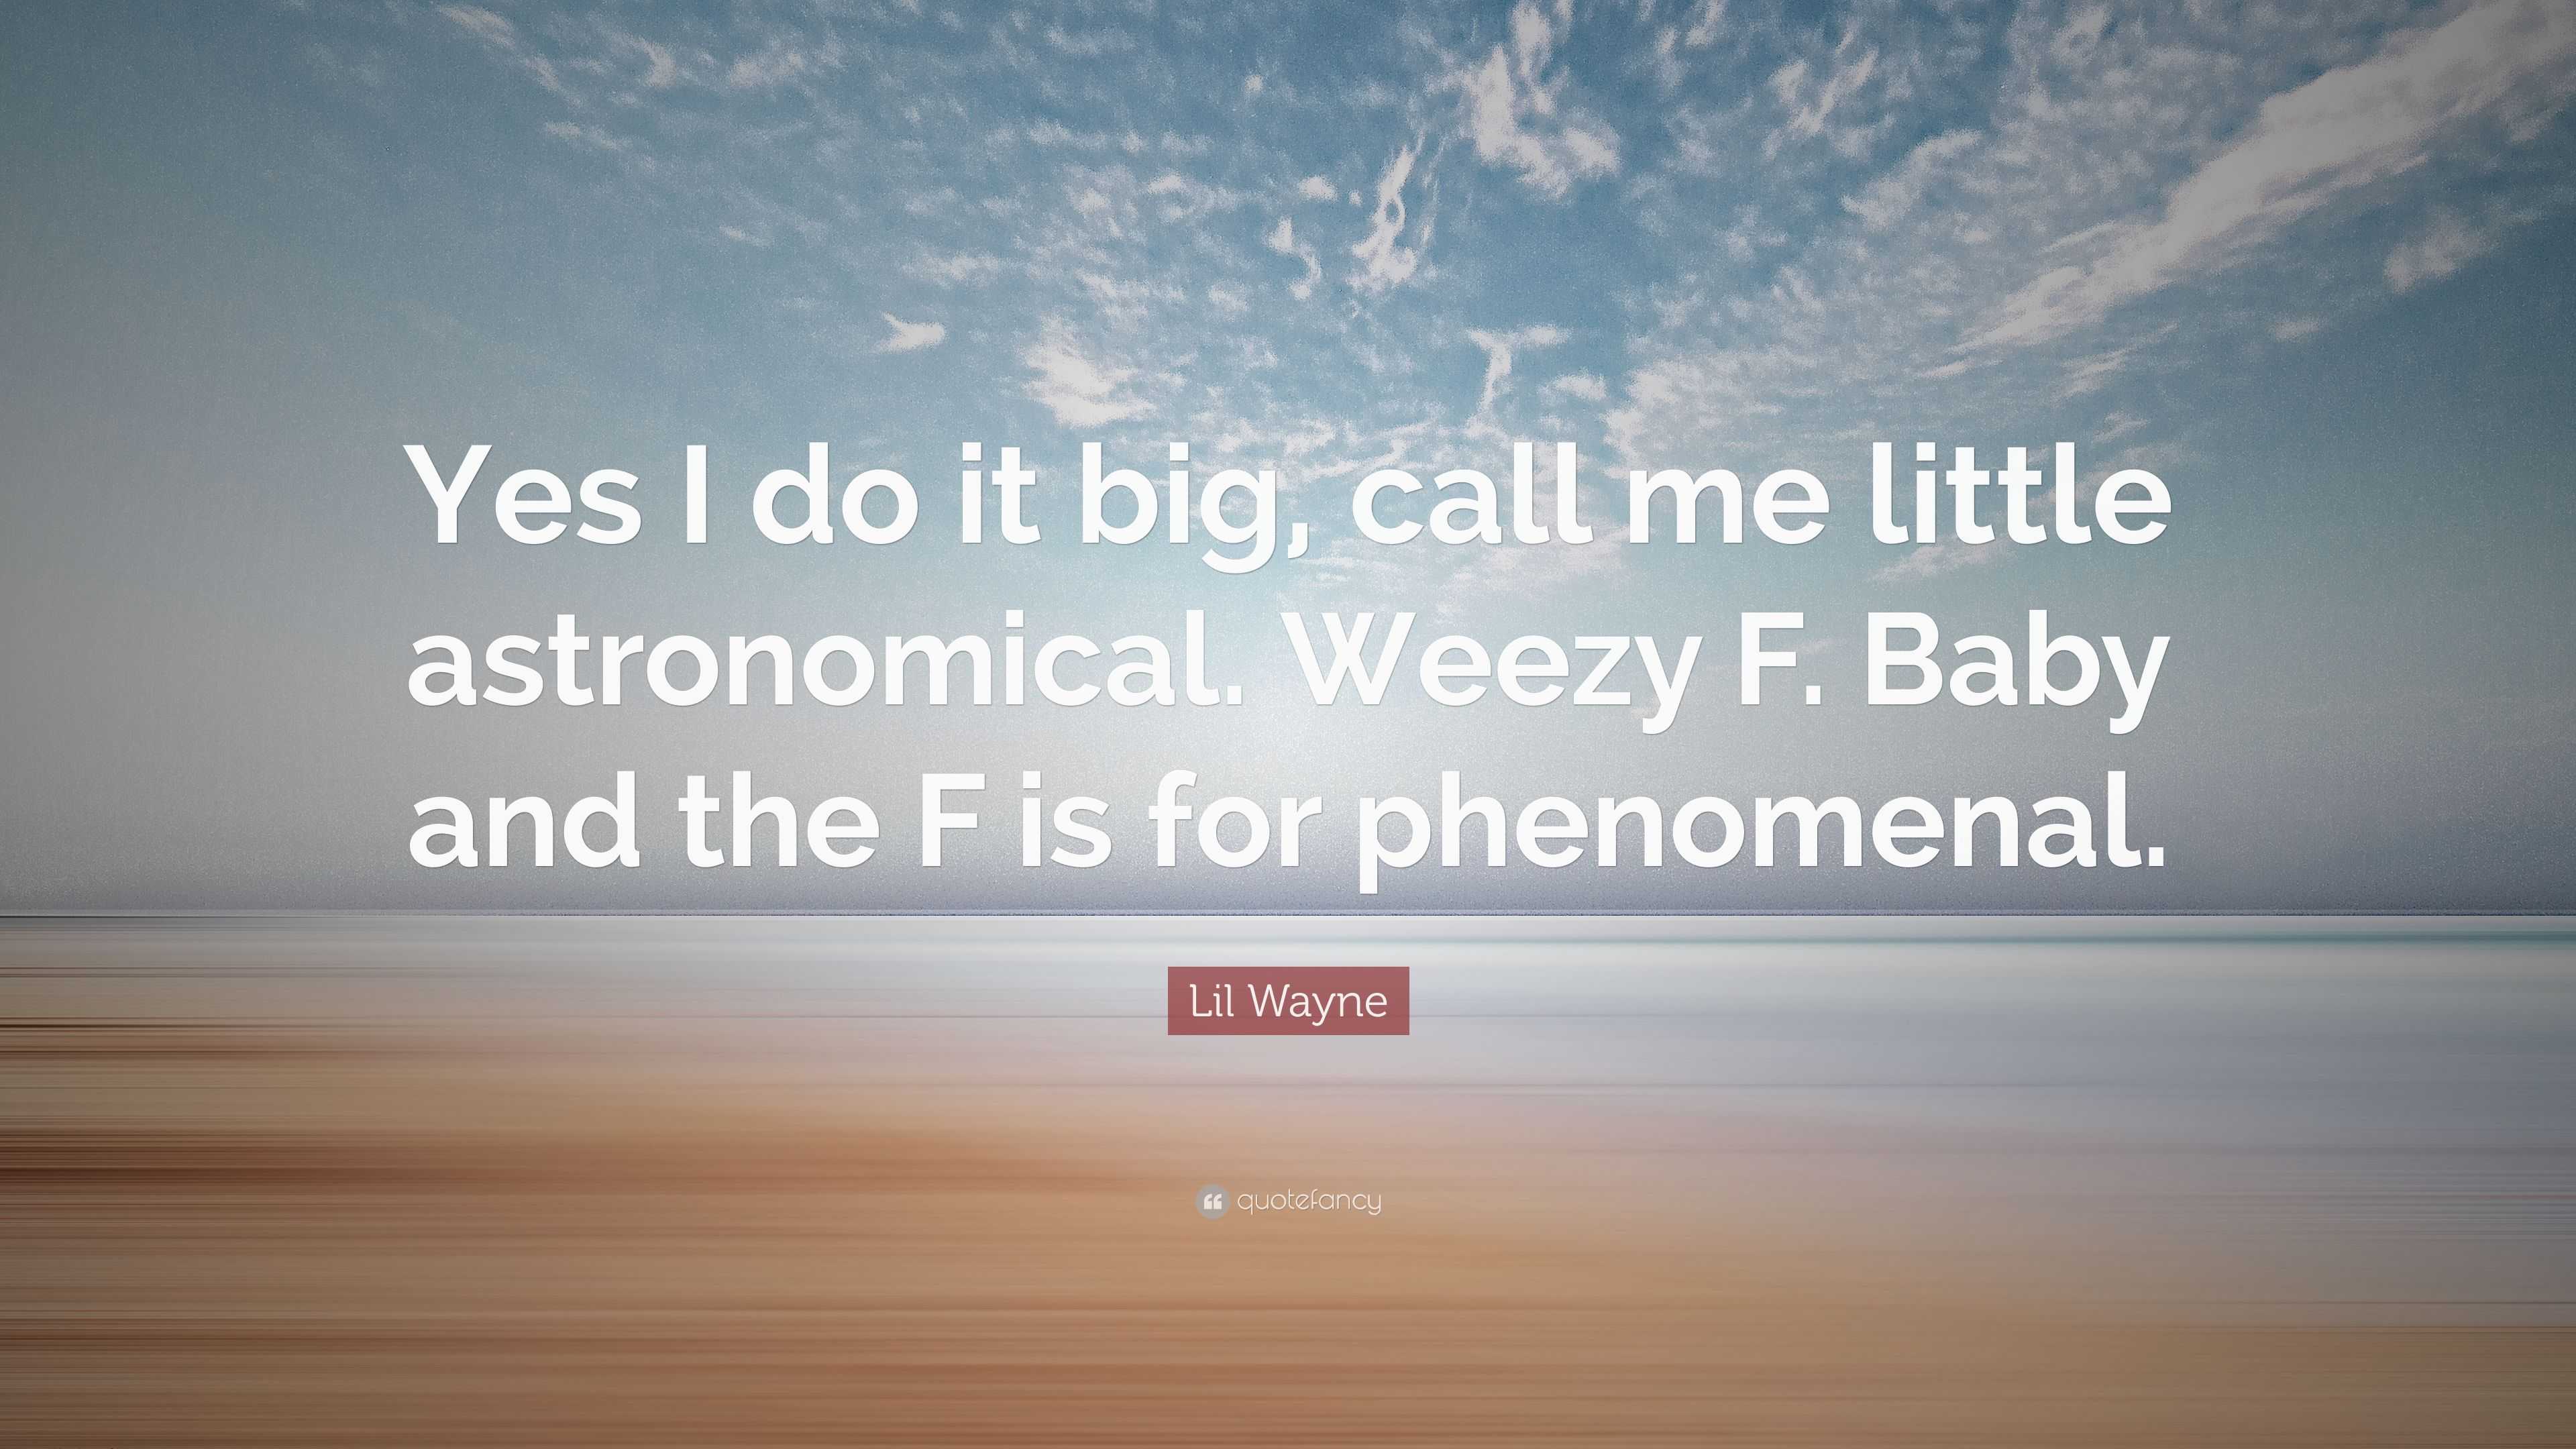 Lil Wayne Quote “Yes I do it big call me little astronomical